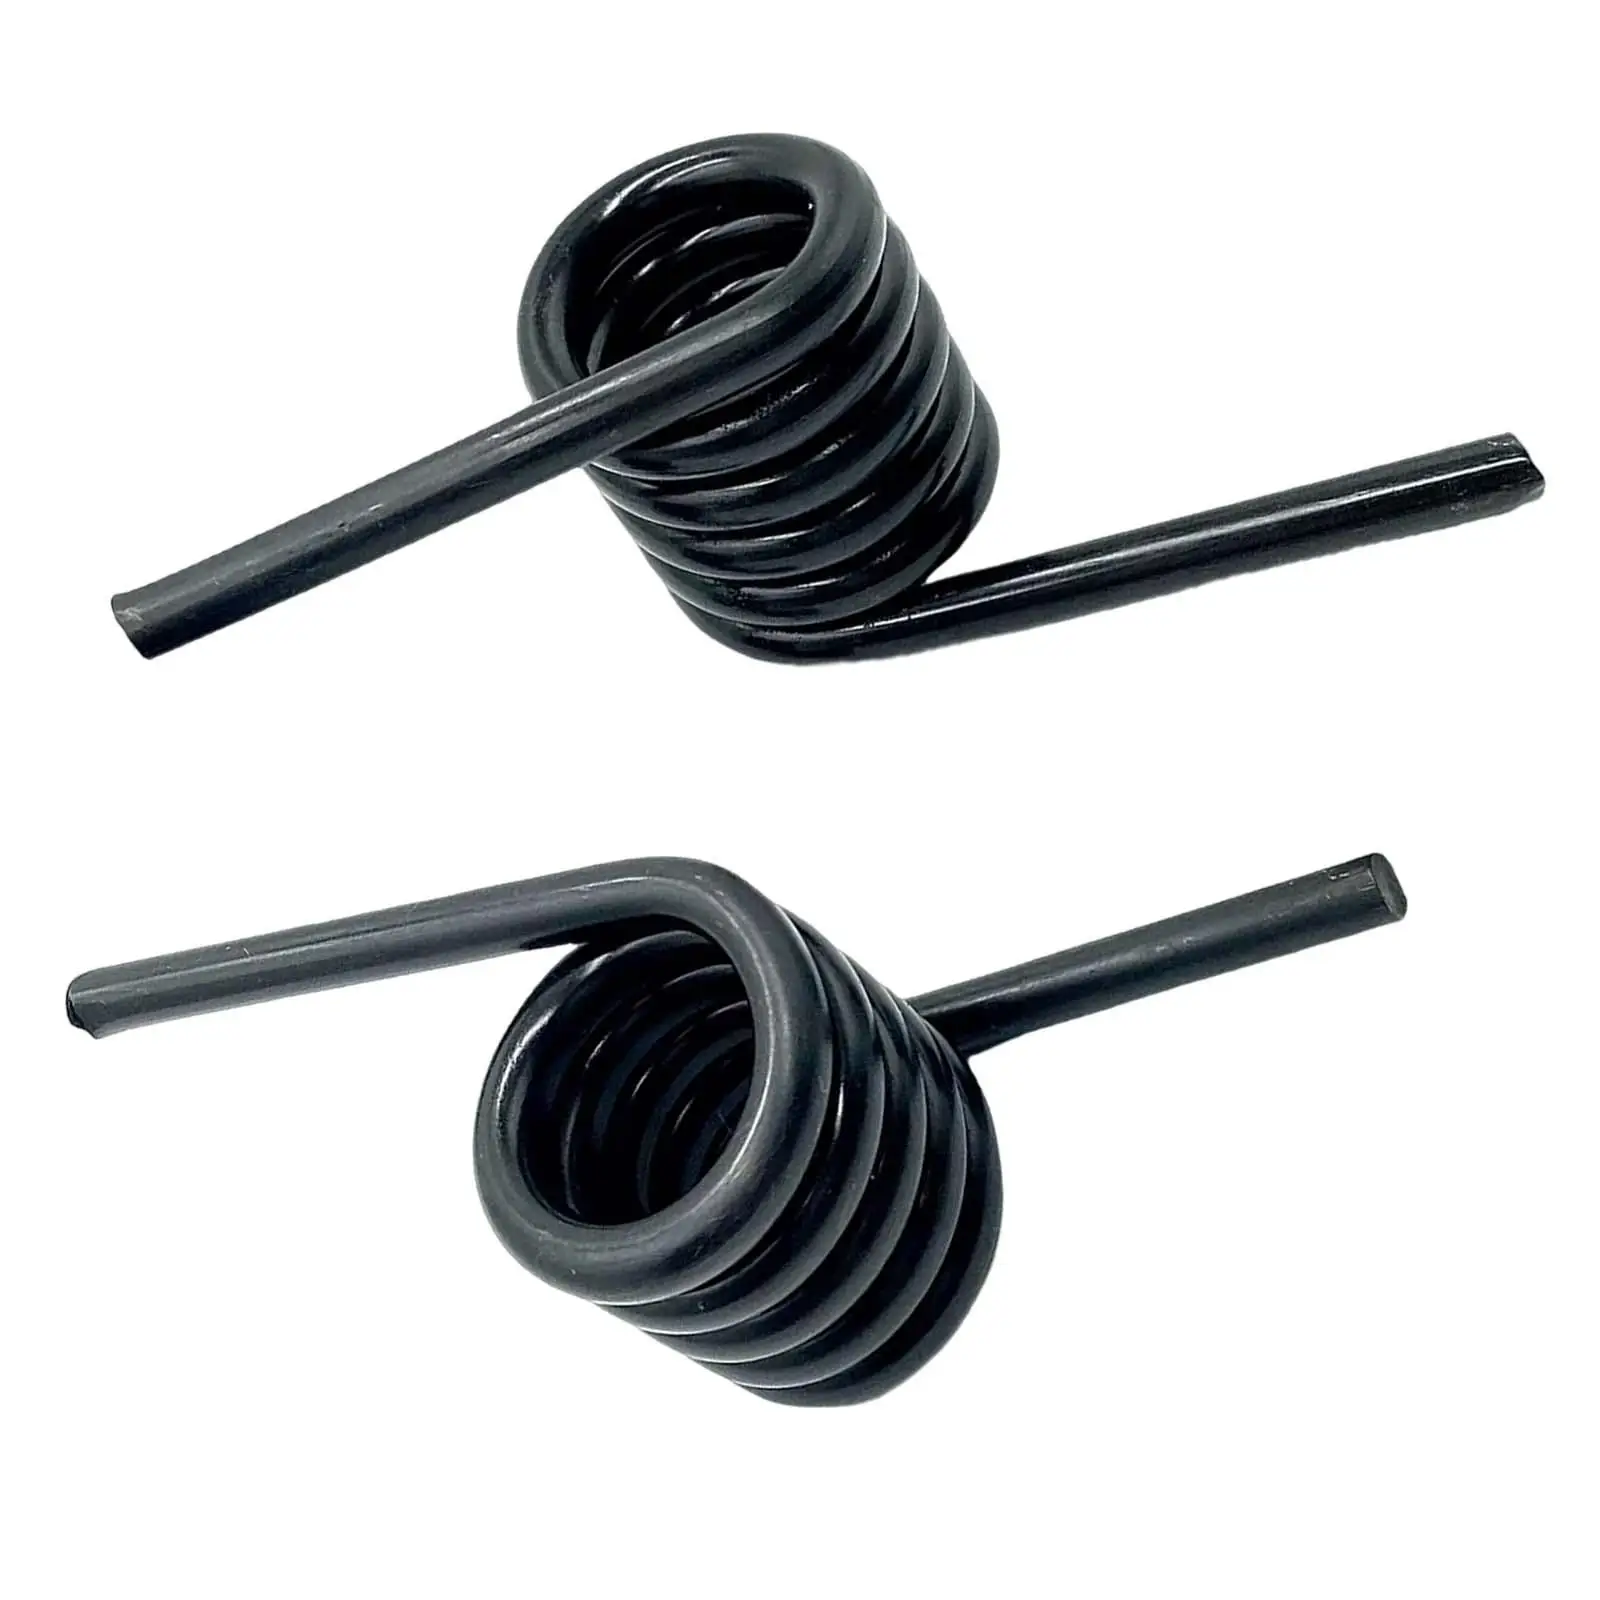 2x Trailer Torsion Ramp Springs 3034278 Left & Right Hand Black Replacement Part High Strength for Trailer Ramps